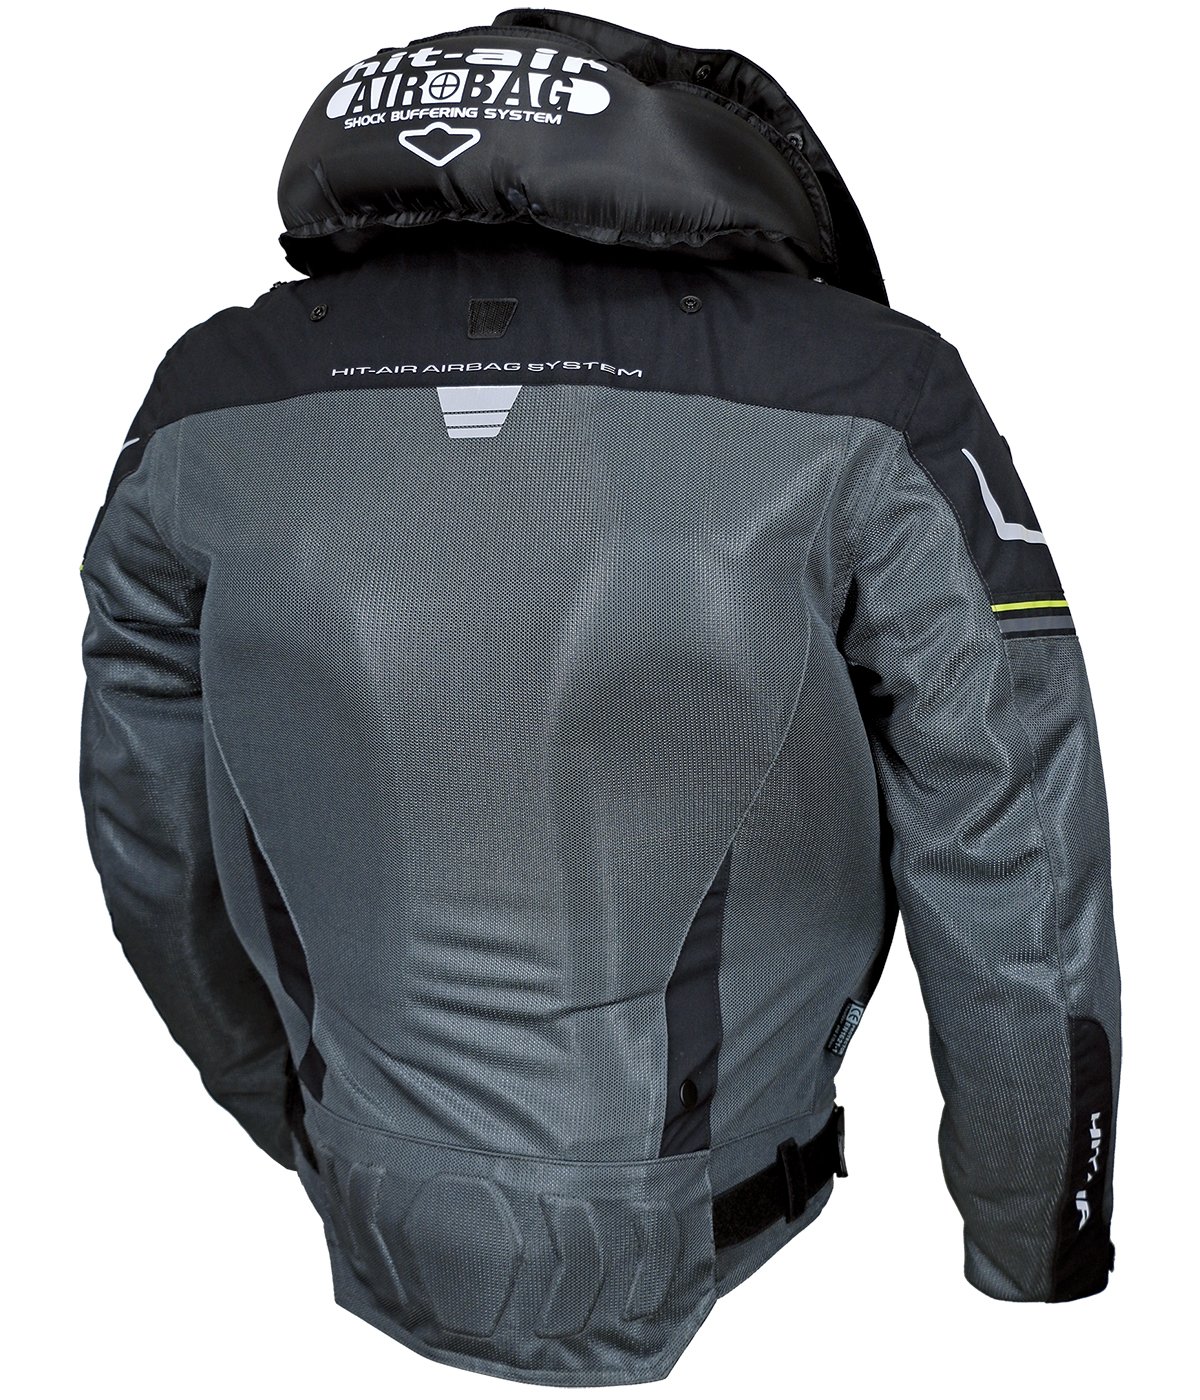 Airbag/After Inflation, Back (Dark Gray)